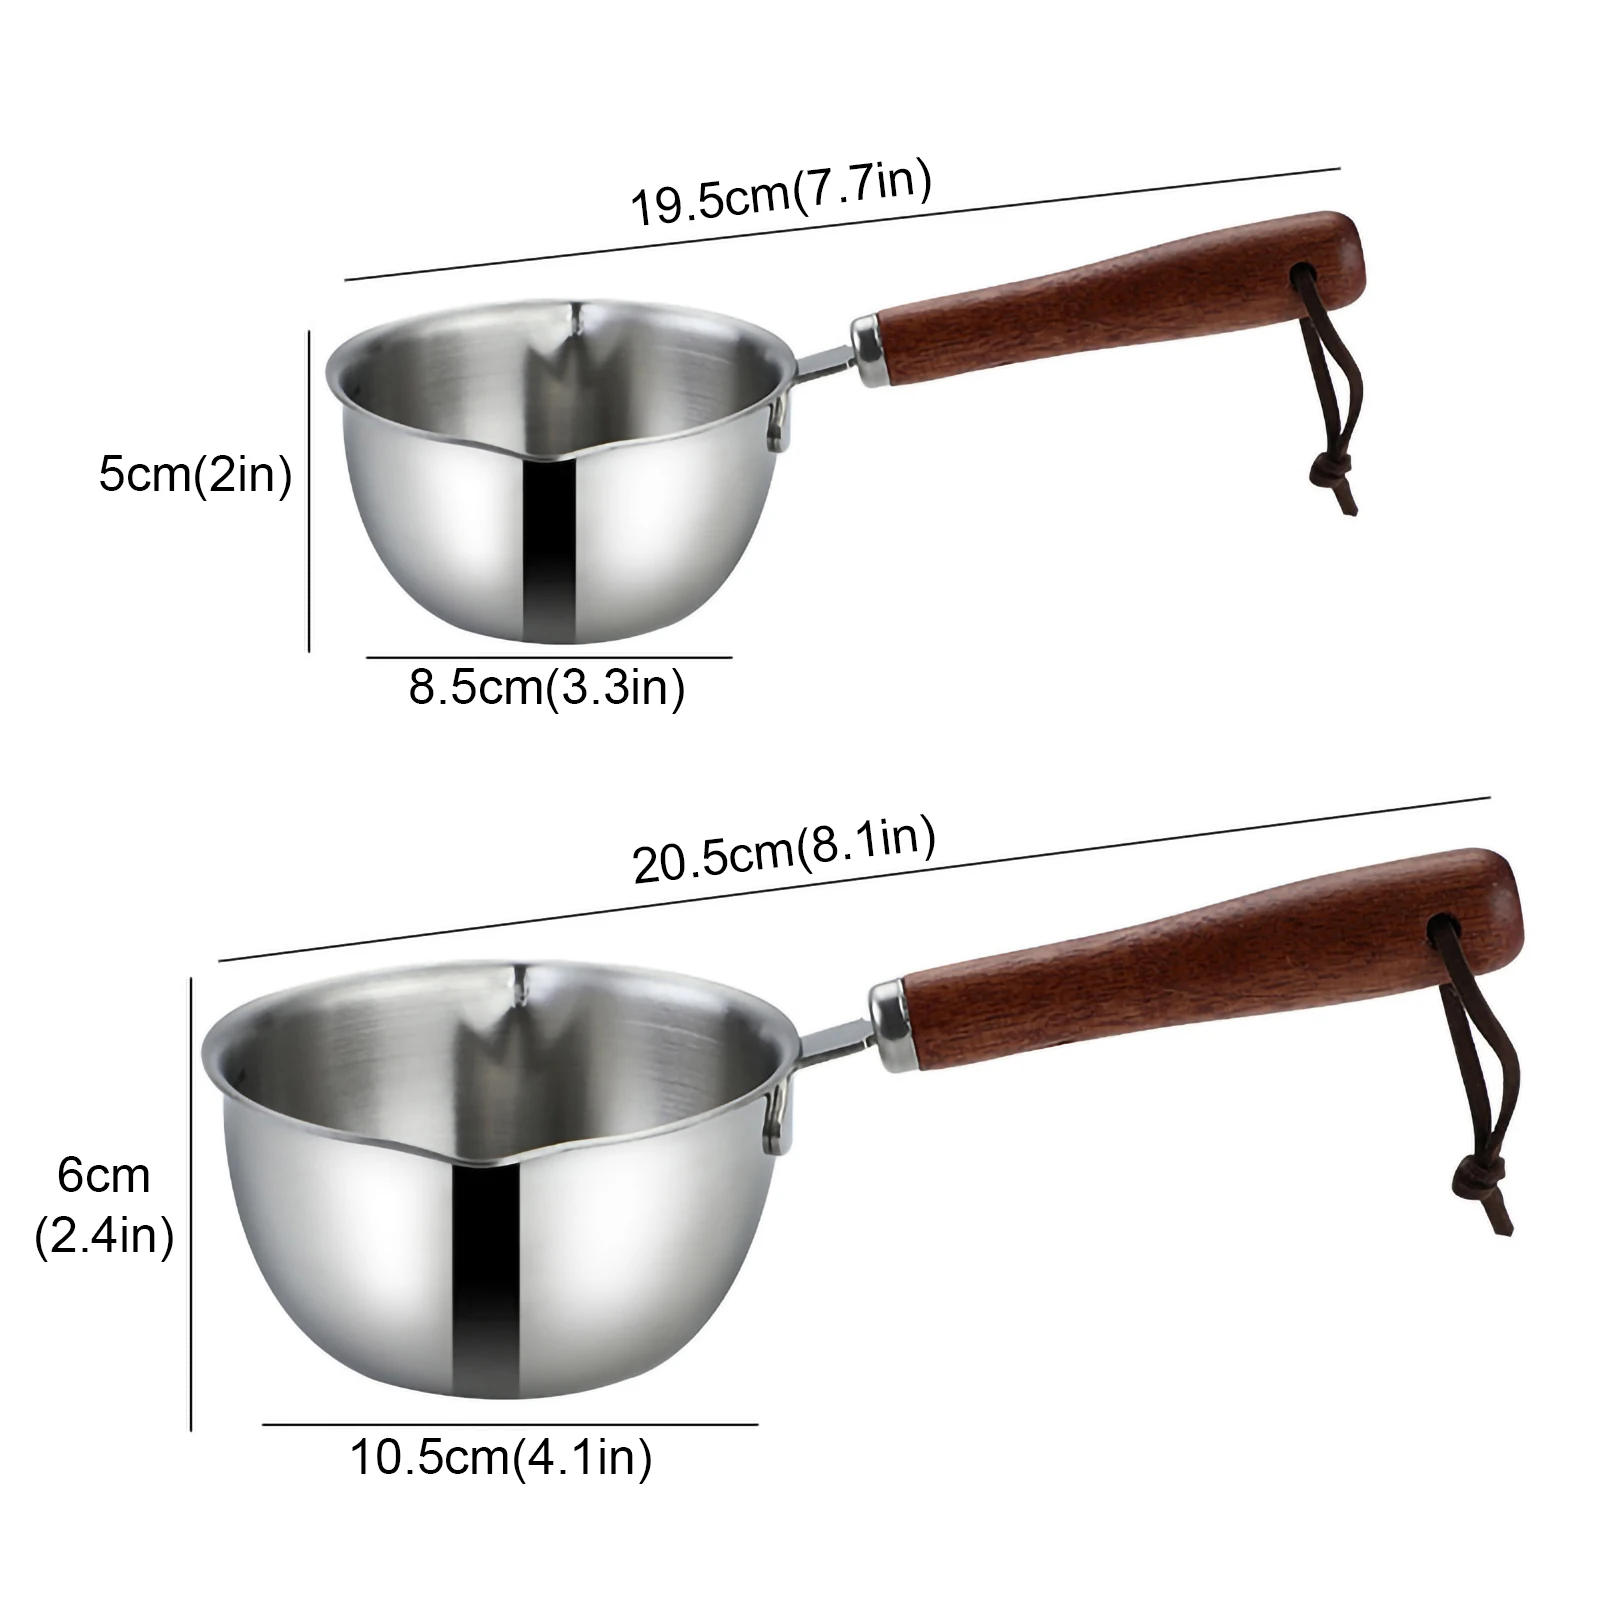 150ml/300ml Stainless Steel Oil Pot with Wooden Handle Can be hung Scalding-proof Spilled Mini Soup Milk butter Pot Kitchen Tool